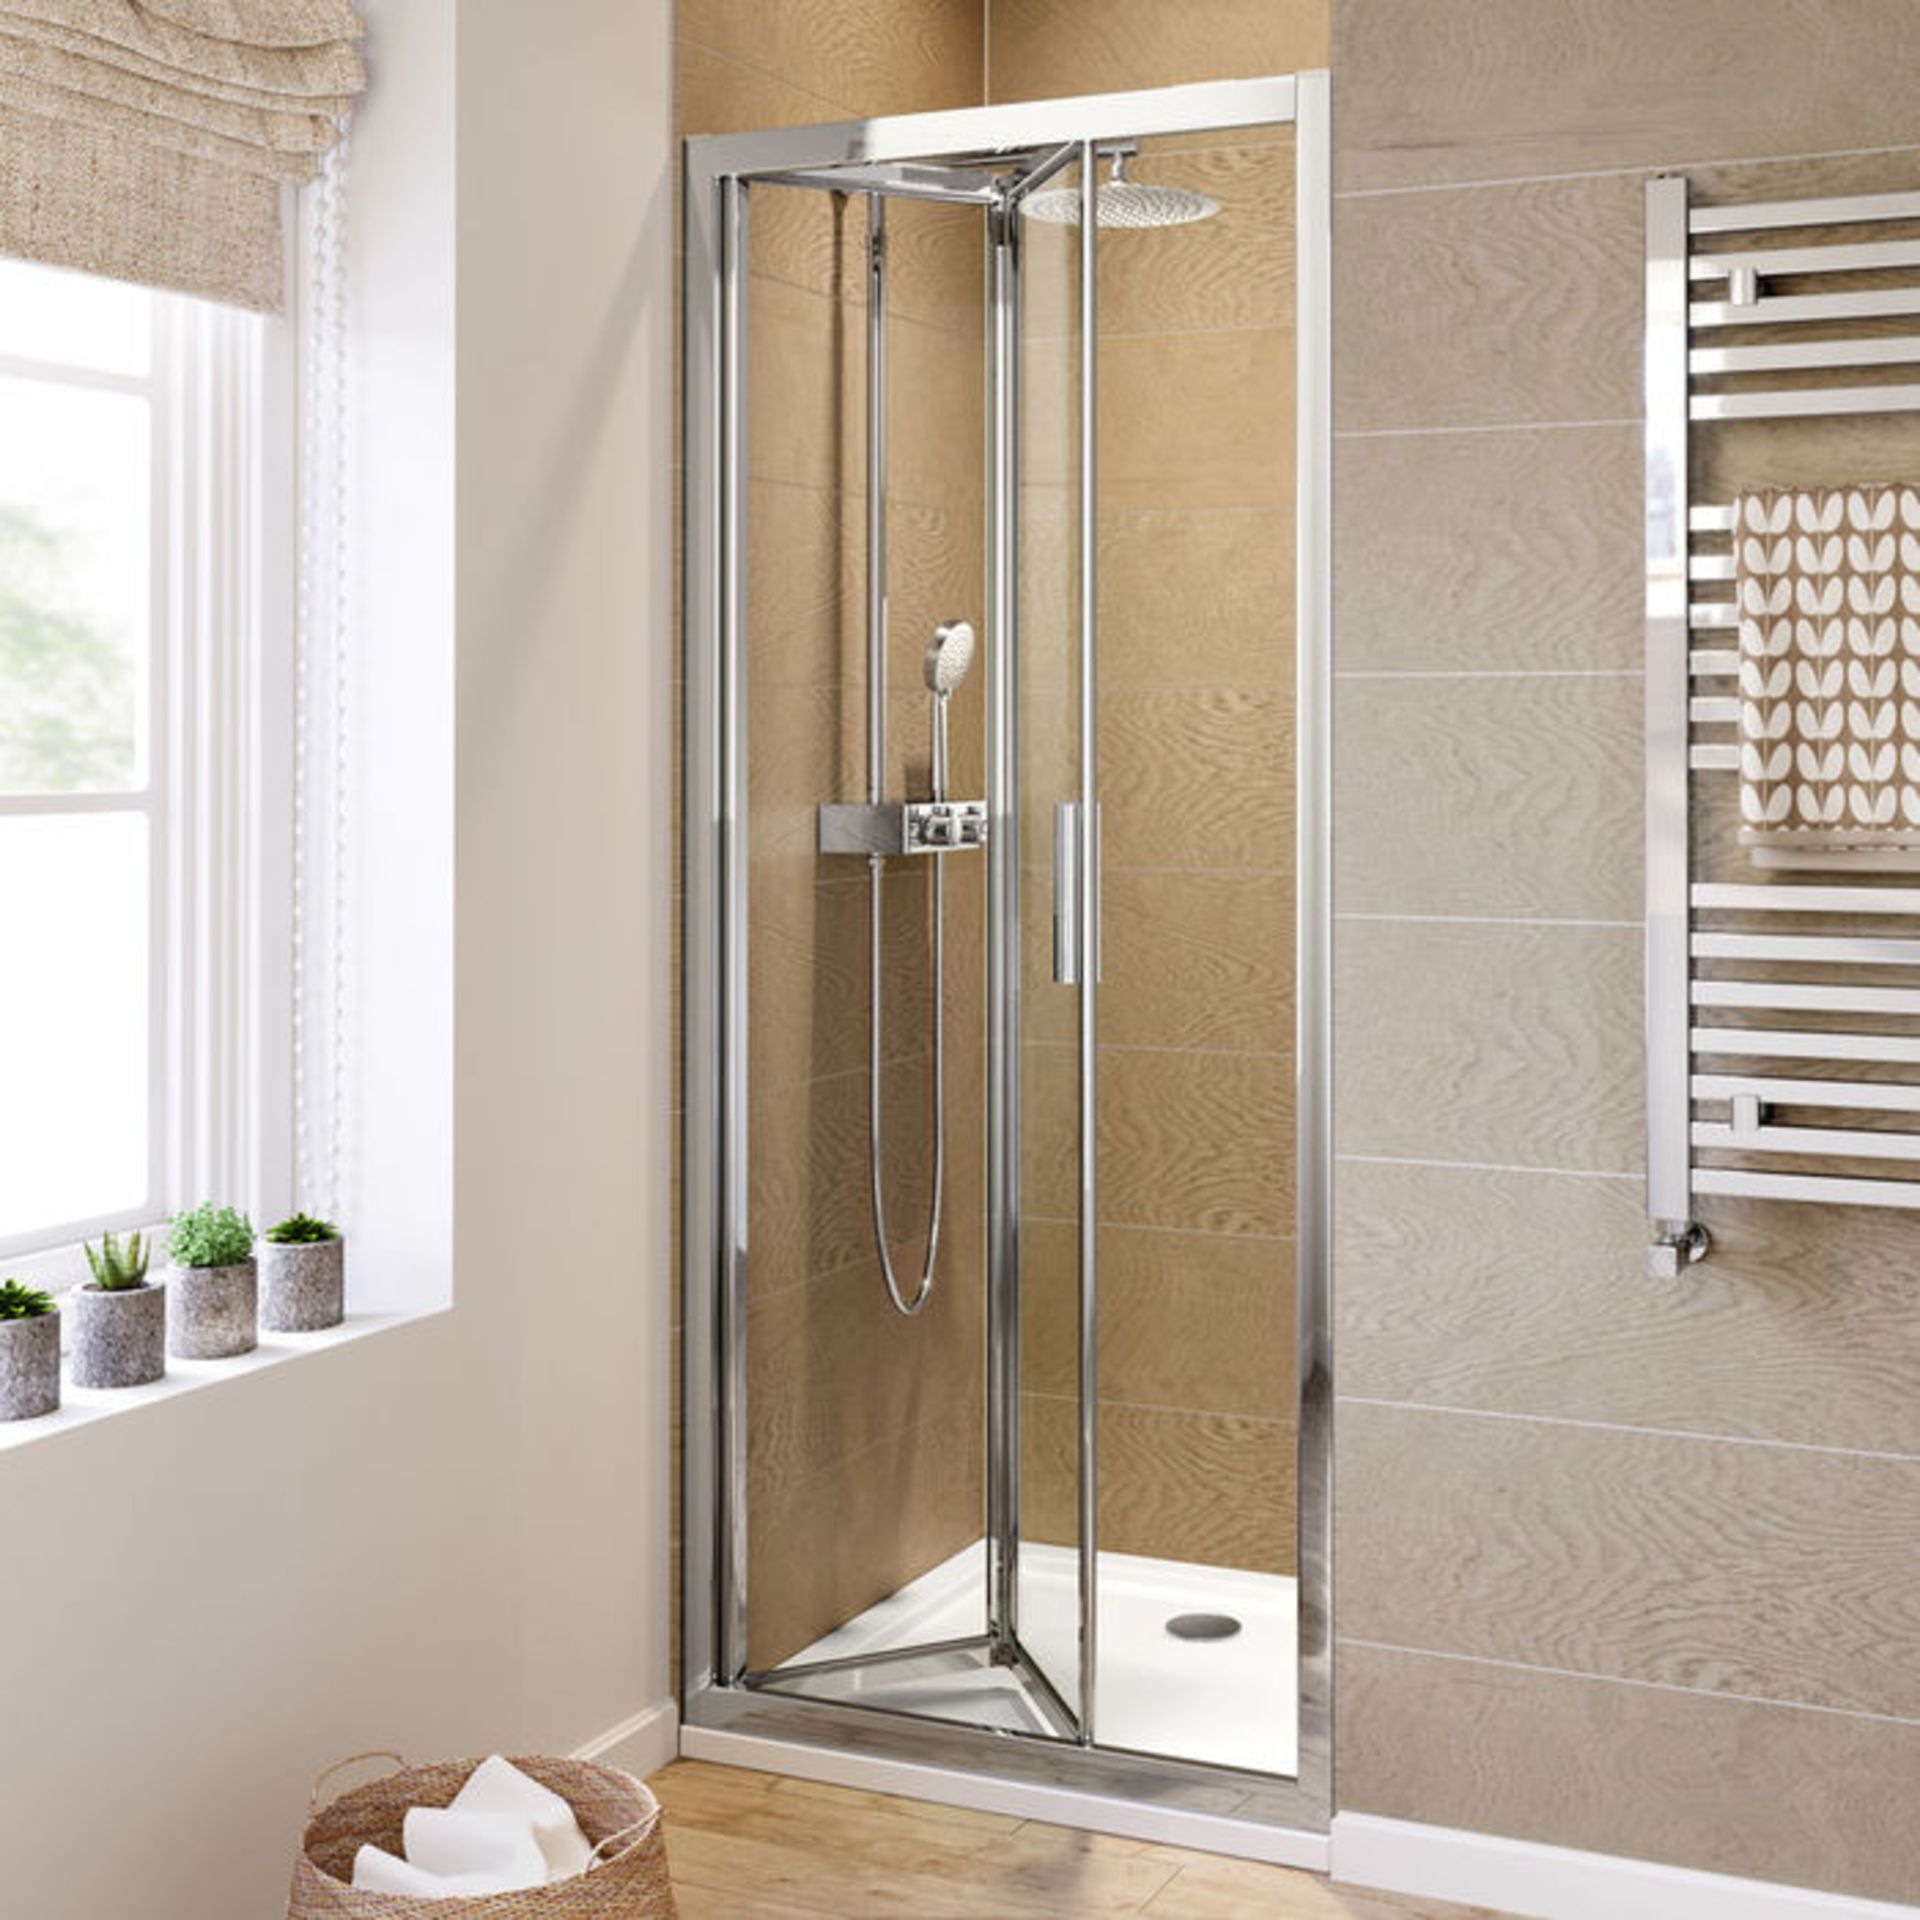 (C196) 800mm - 6mm - Elements EasyClean Bifold Shower Door. RRP £299.99. 6mm Safety Glass - Single- - Image 2 of 2